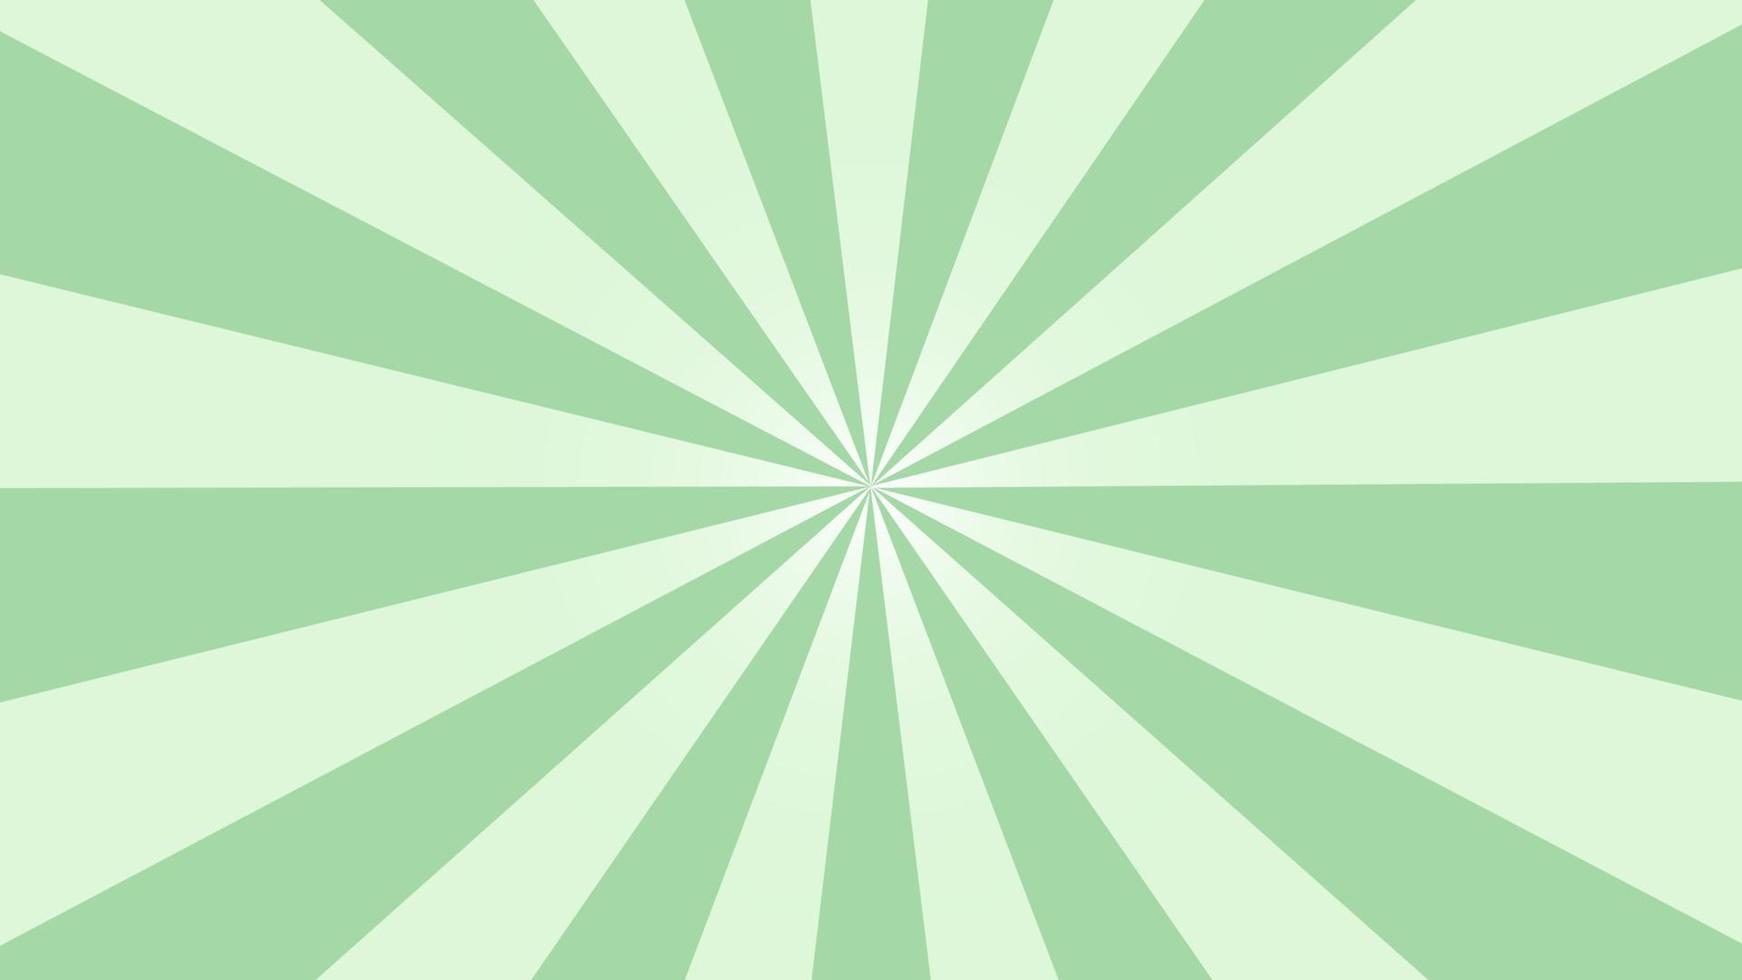 Green and white radial background with a central circle - Pastel green